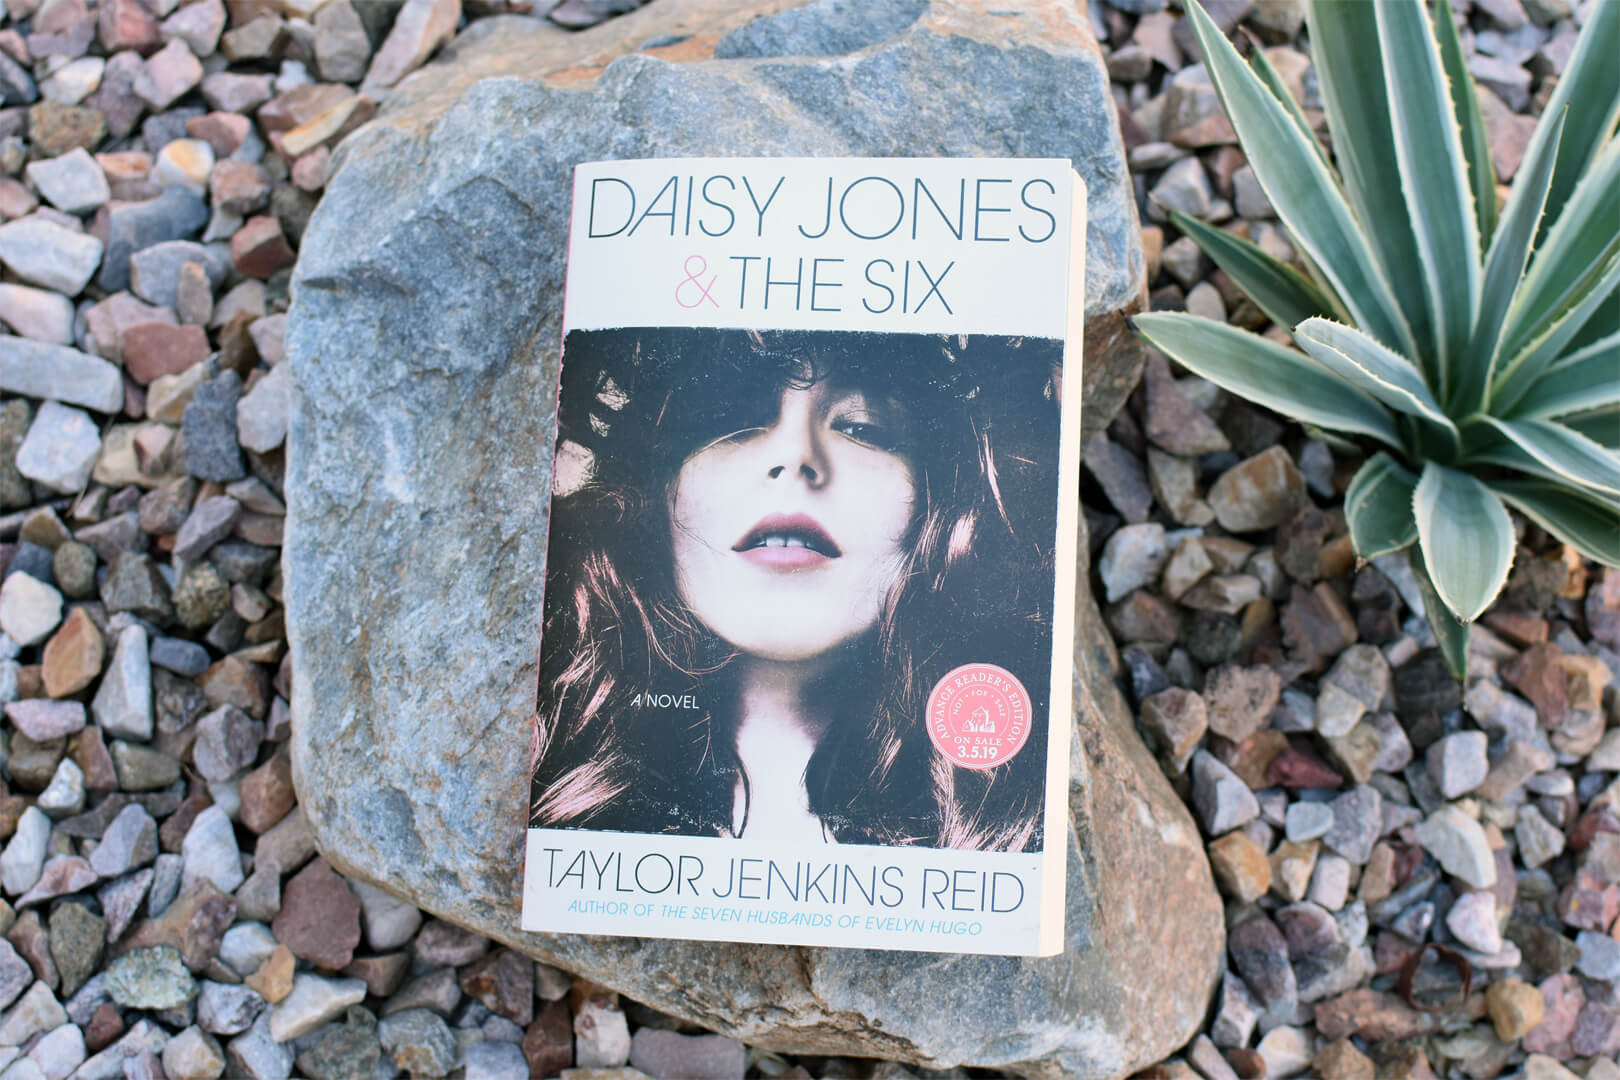 Book Club Questions for Daisy Jones & The Six by Taylor Jenkins Reid